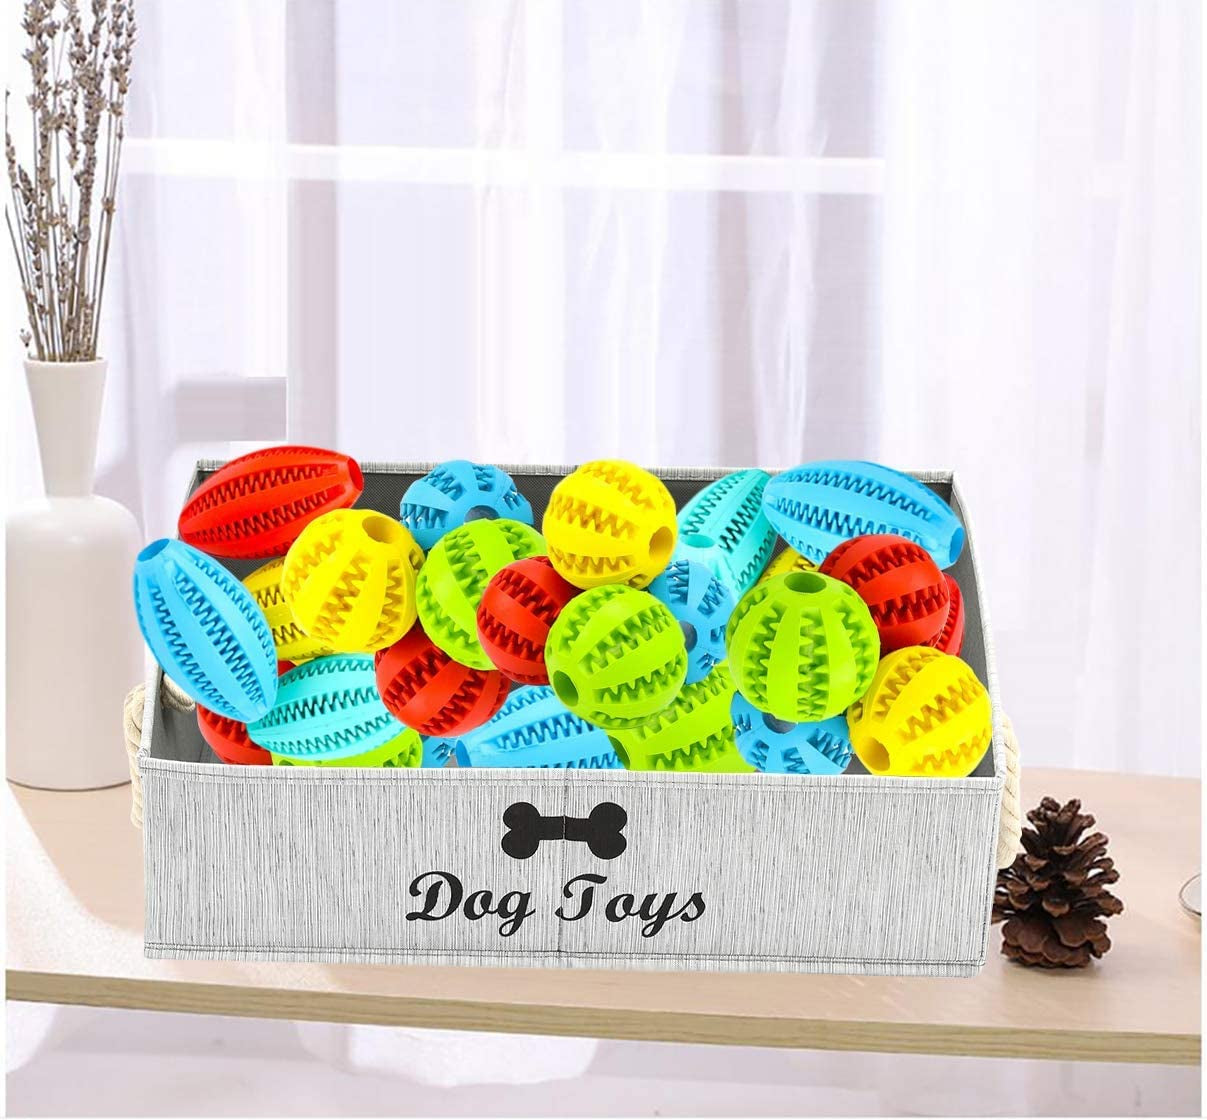 Large Dog Toy Bin Puppy Shallow Toy Baskets - Perfect for Collapsible Bin for Living Room, Playroom, Closet, Home Organization - Grey - Rectangle - Dog